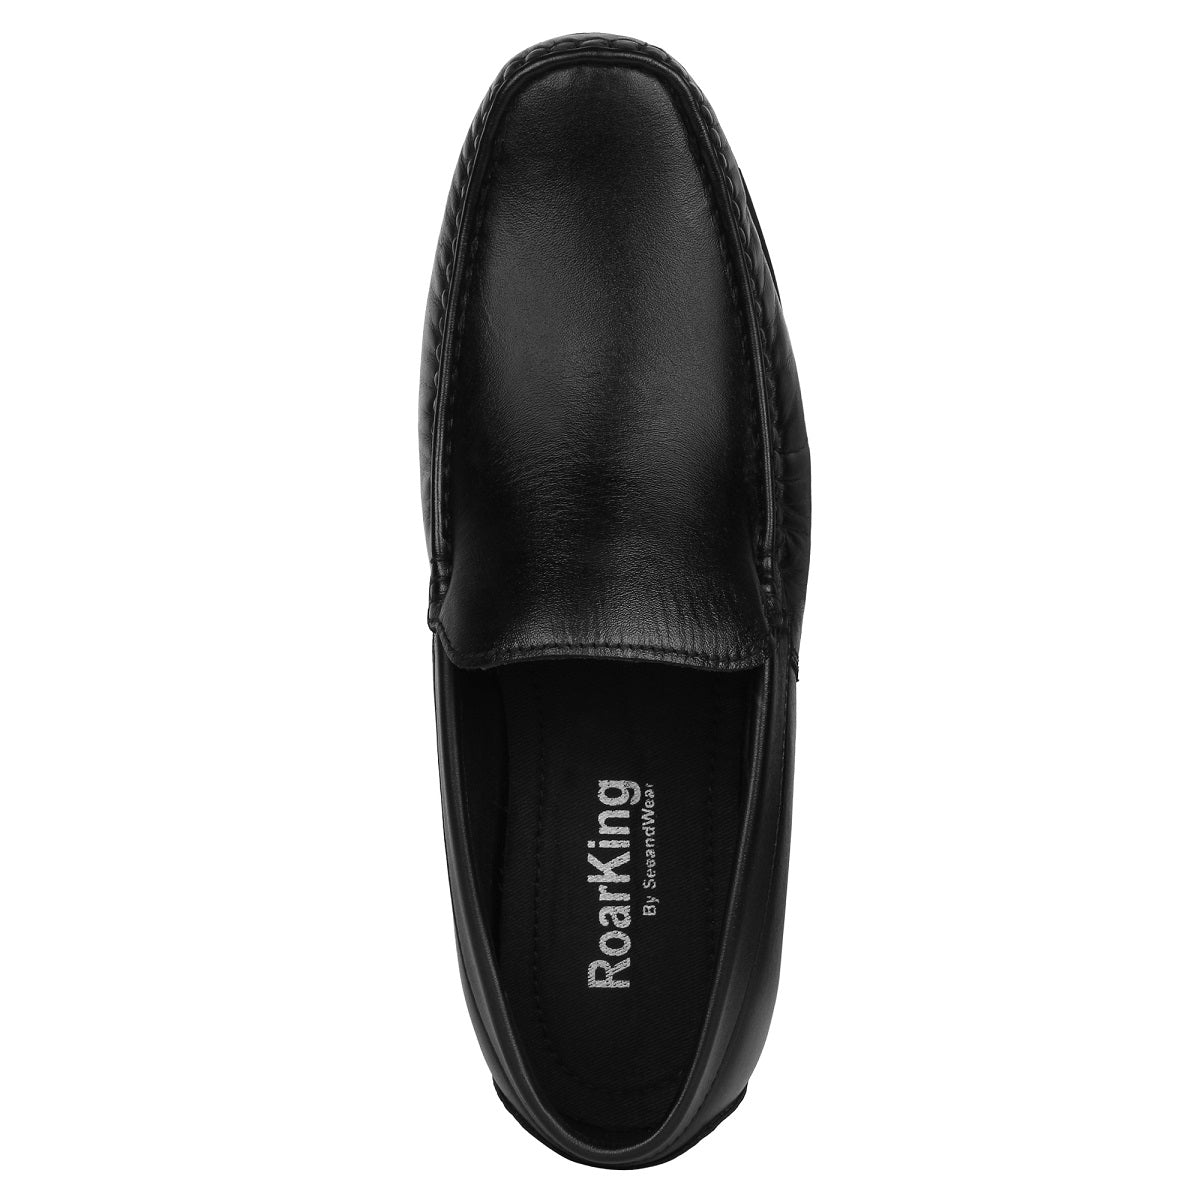 Leather Loafers for Men -Defective